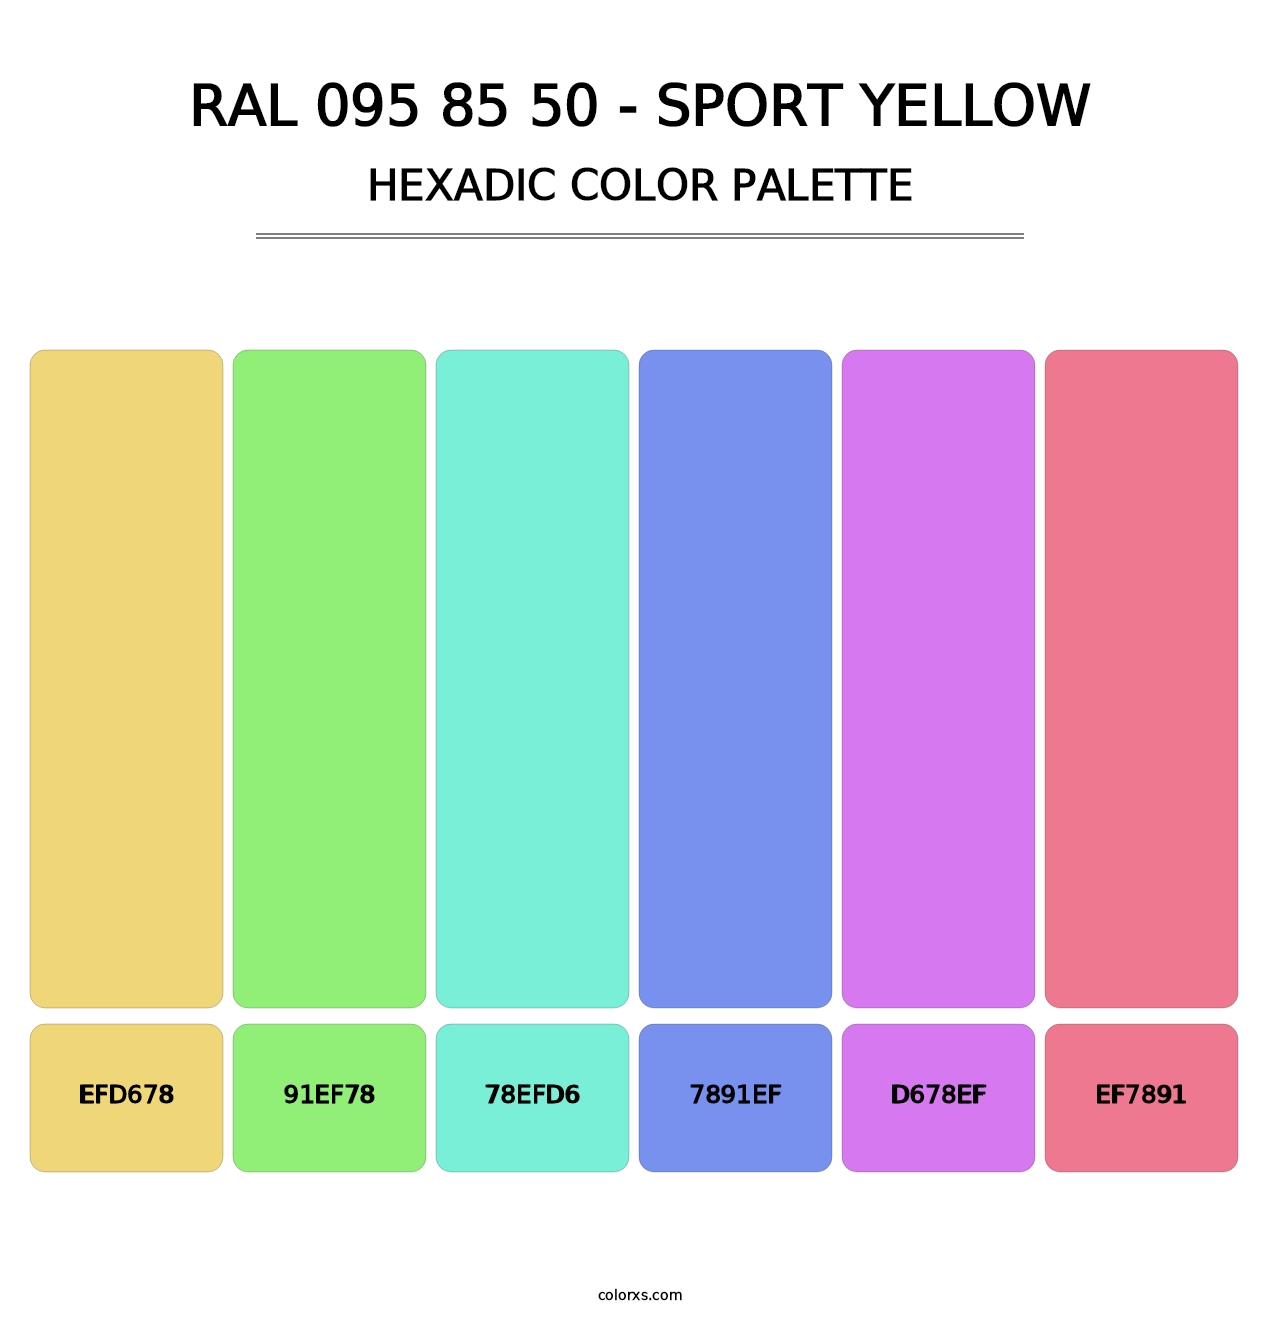 RAL 095 85 50 - Sport Yellow - Hexadic Color Palette